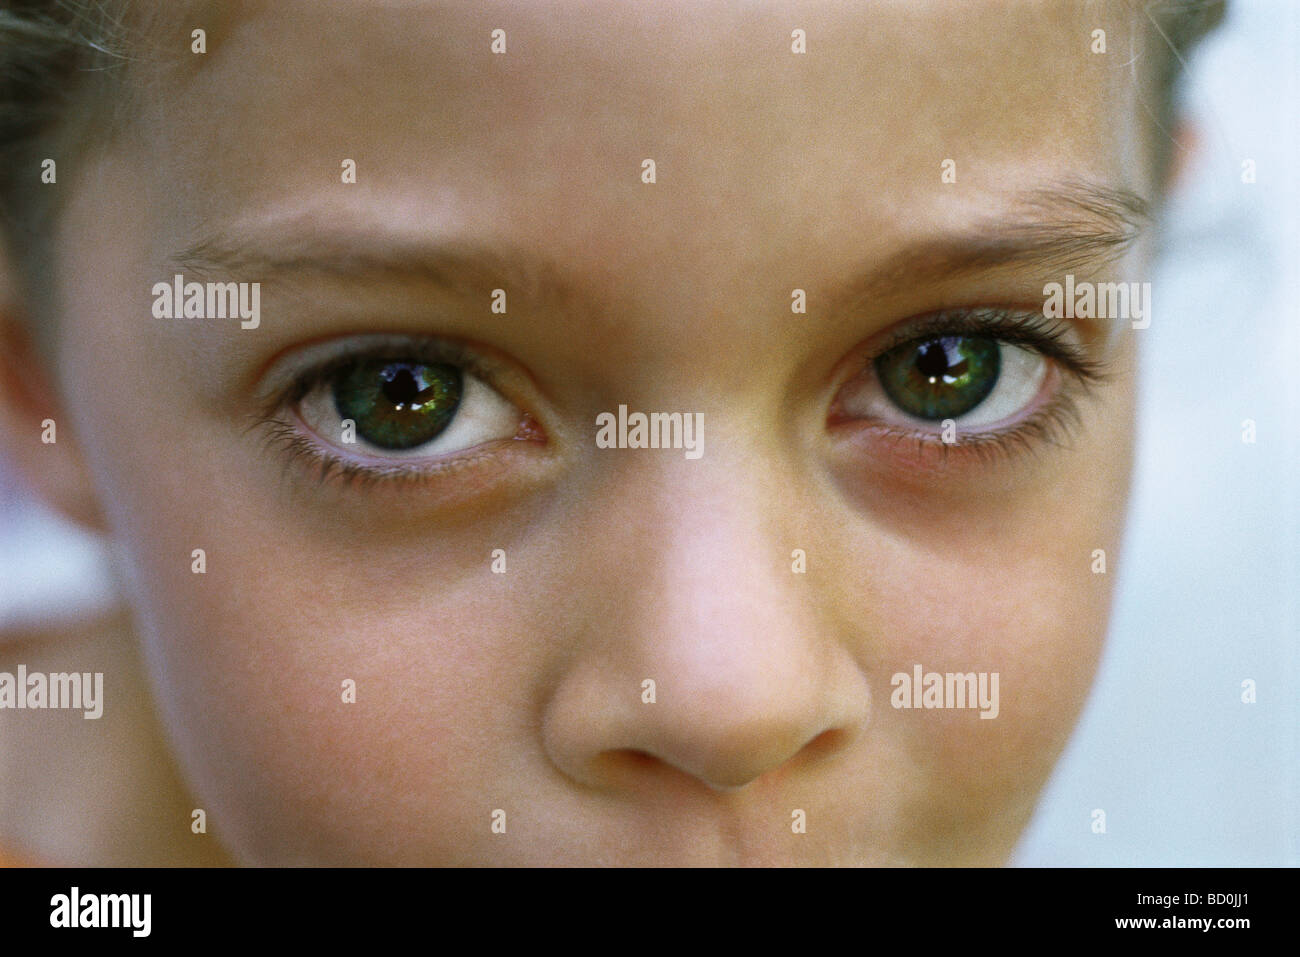 Child's face, close-up Stock Photo